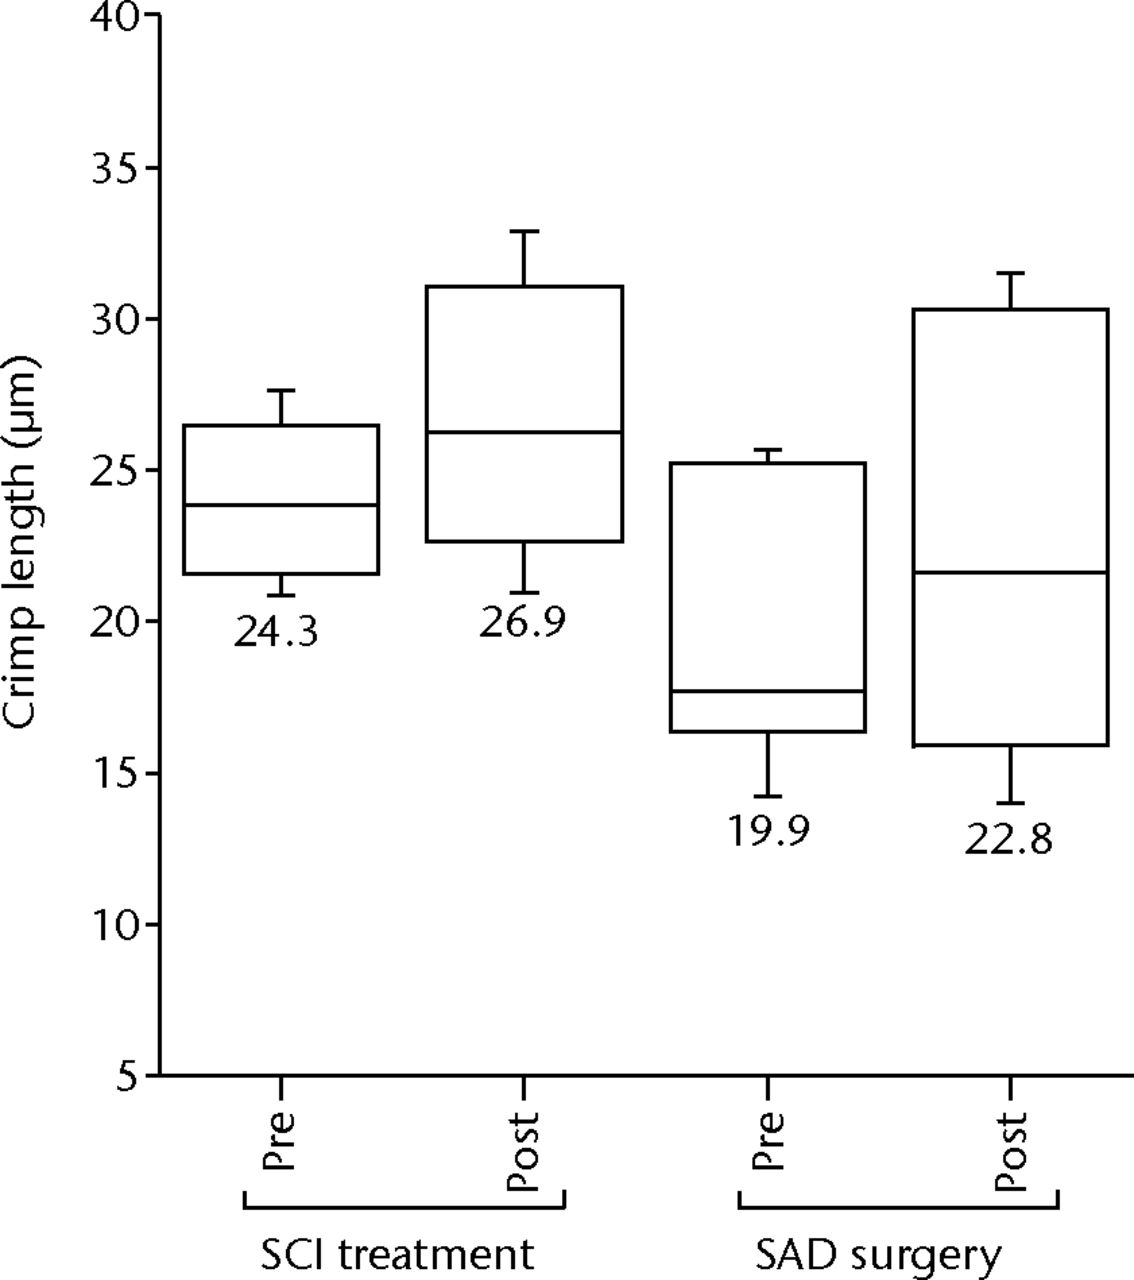 Fig. 10 
          Crimp length measurements for partial
tear groups before and after subachromial corticosteroid injections
(SCI) and subacromial decompression (SAD) surgery. There are no
significant changes in crimp length after SCI treatment or after SAD
surgery compared with the pre-treatment measurements (p >
 0.05).
        